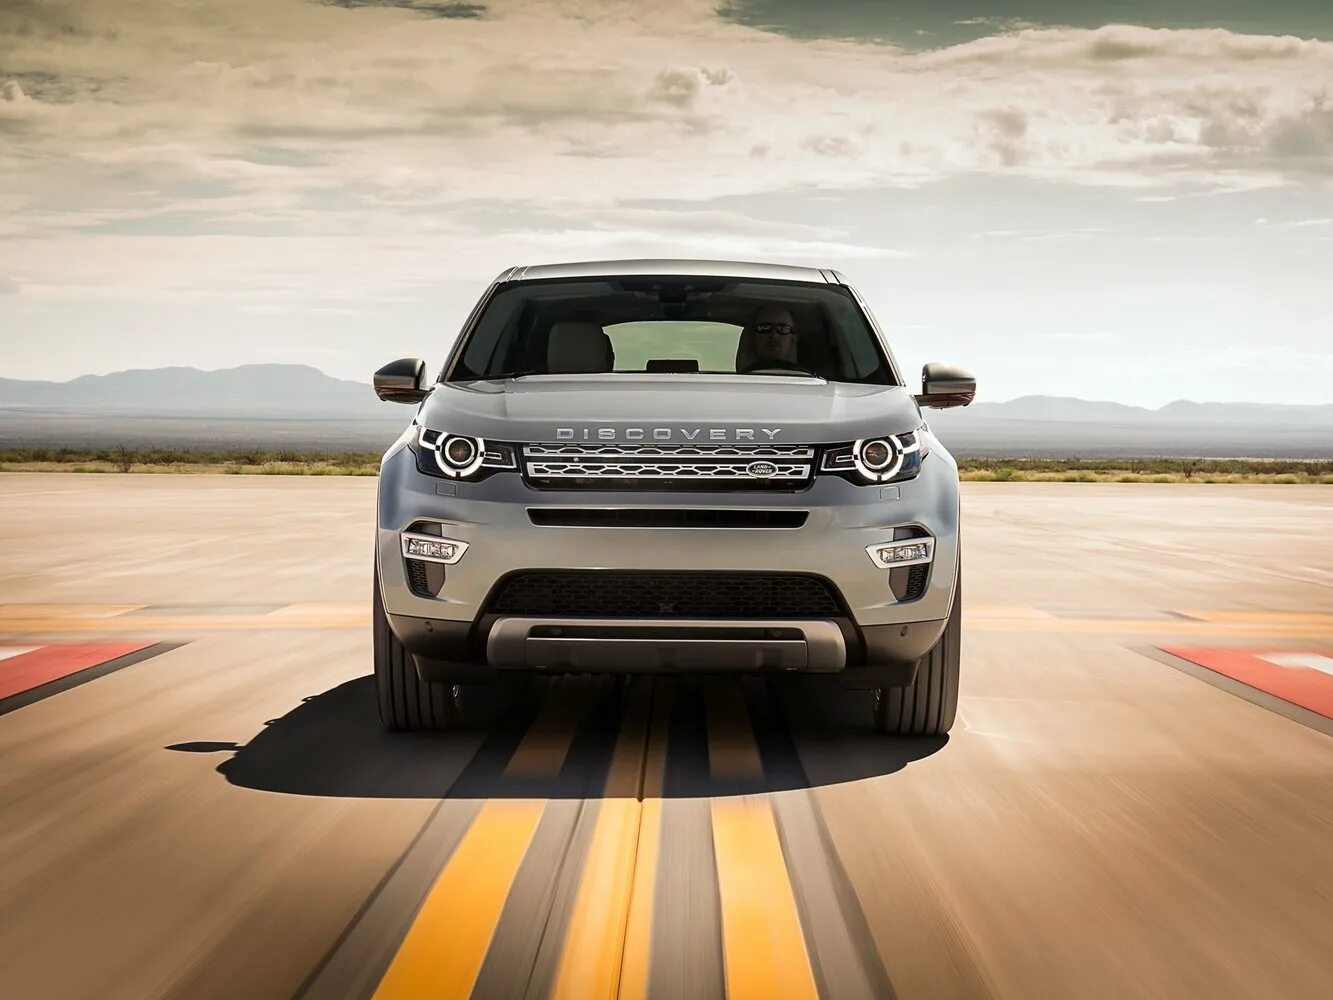 Discovery sport 2.0. Land Rover Discovery Sport 2015. Land Rover Discovery Sport 2014. Range Rover Discovery Sport 2015. Ленд Ровер Дискавери спорт 2015.